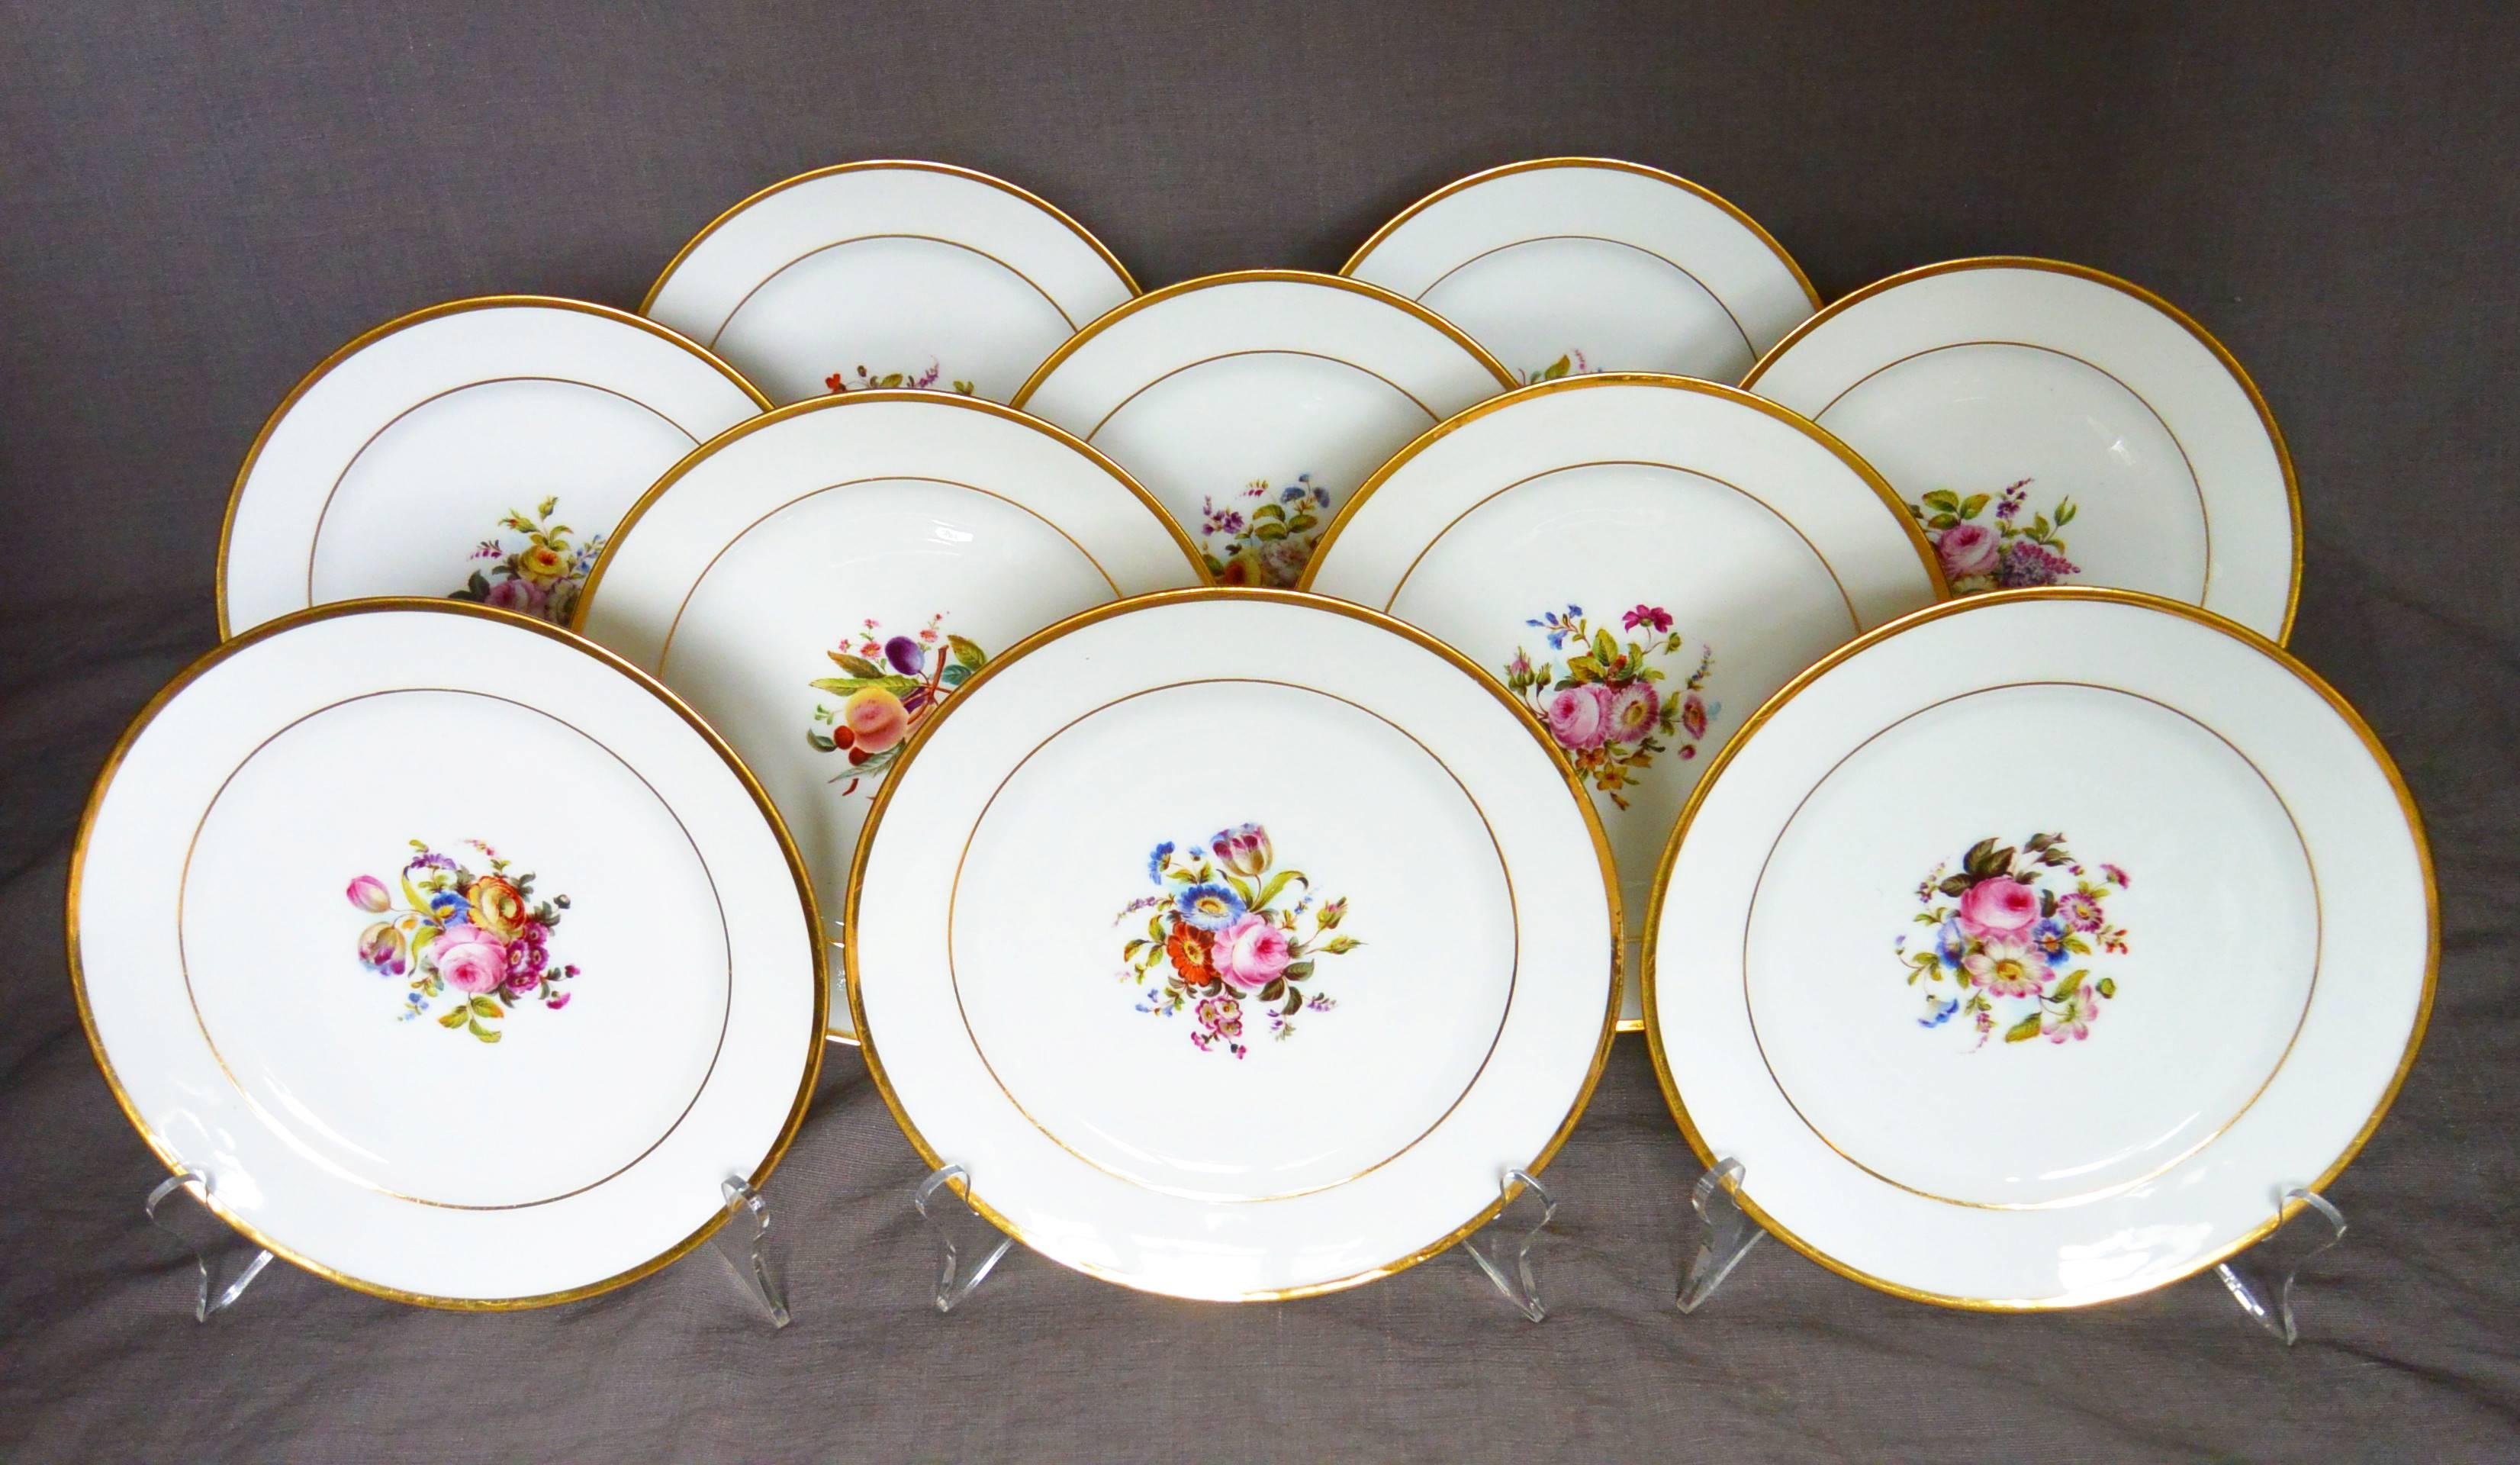 Antique set of ten Empire white and gilt plates with center floral bouquets; with underglaze red markings for L. Ernie 61 Rue du Bac., France, early 1800
Dimension: 8.25